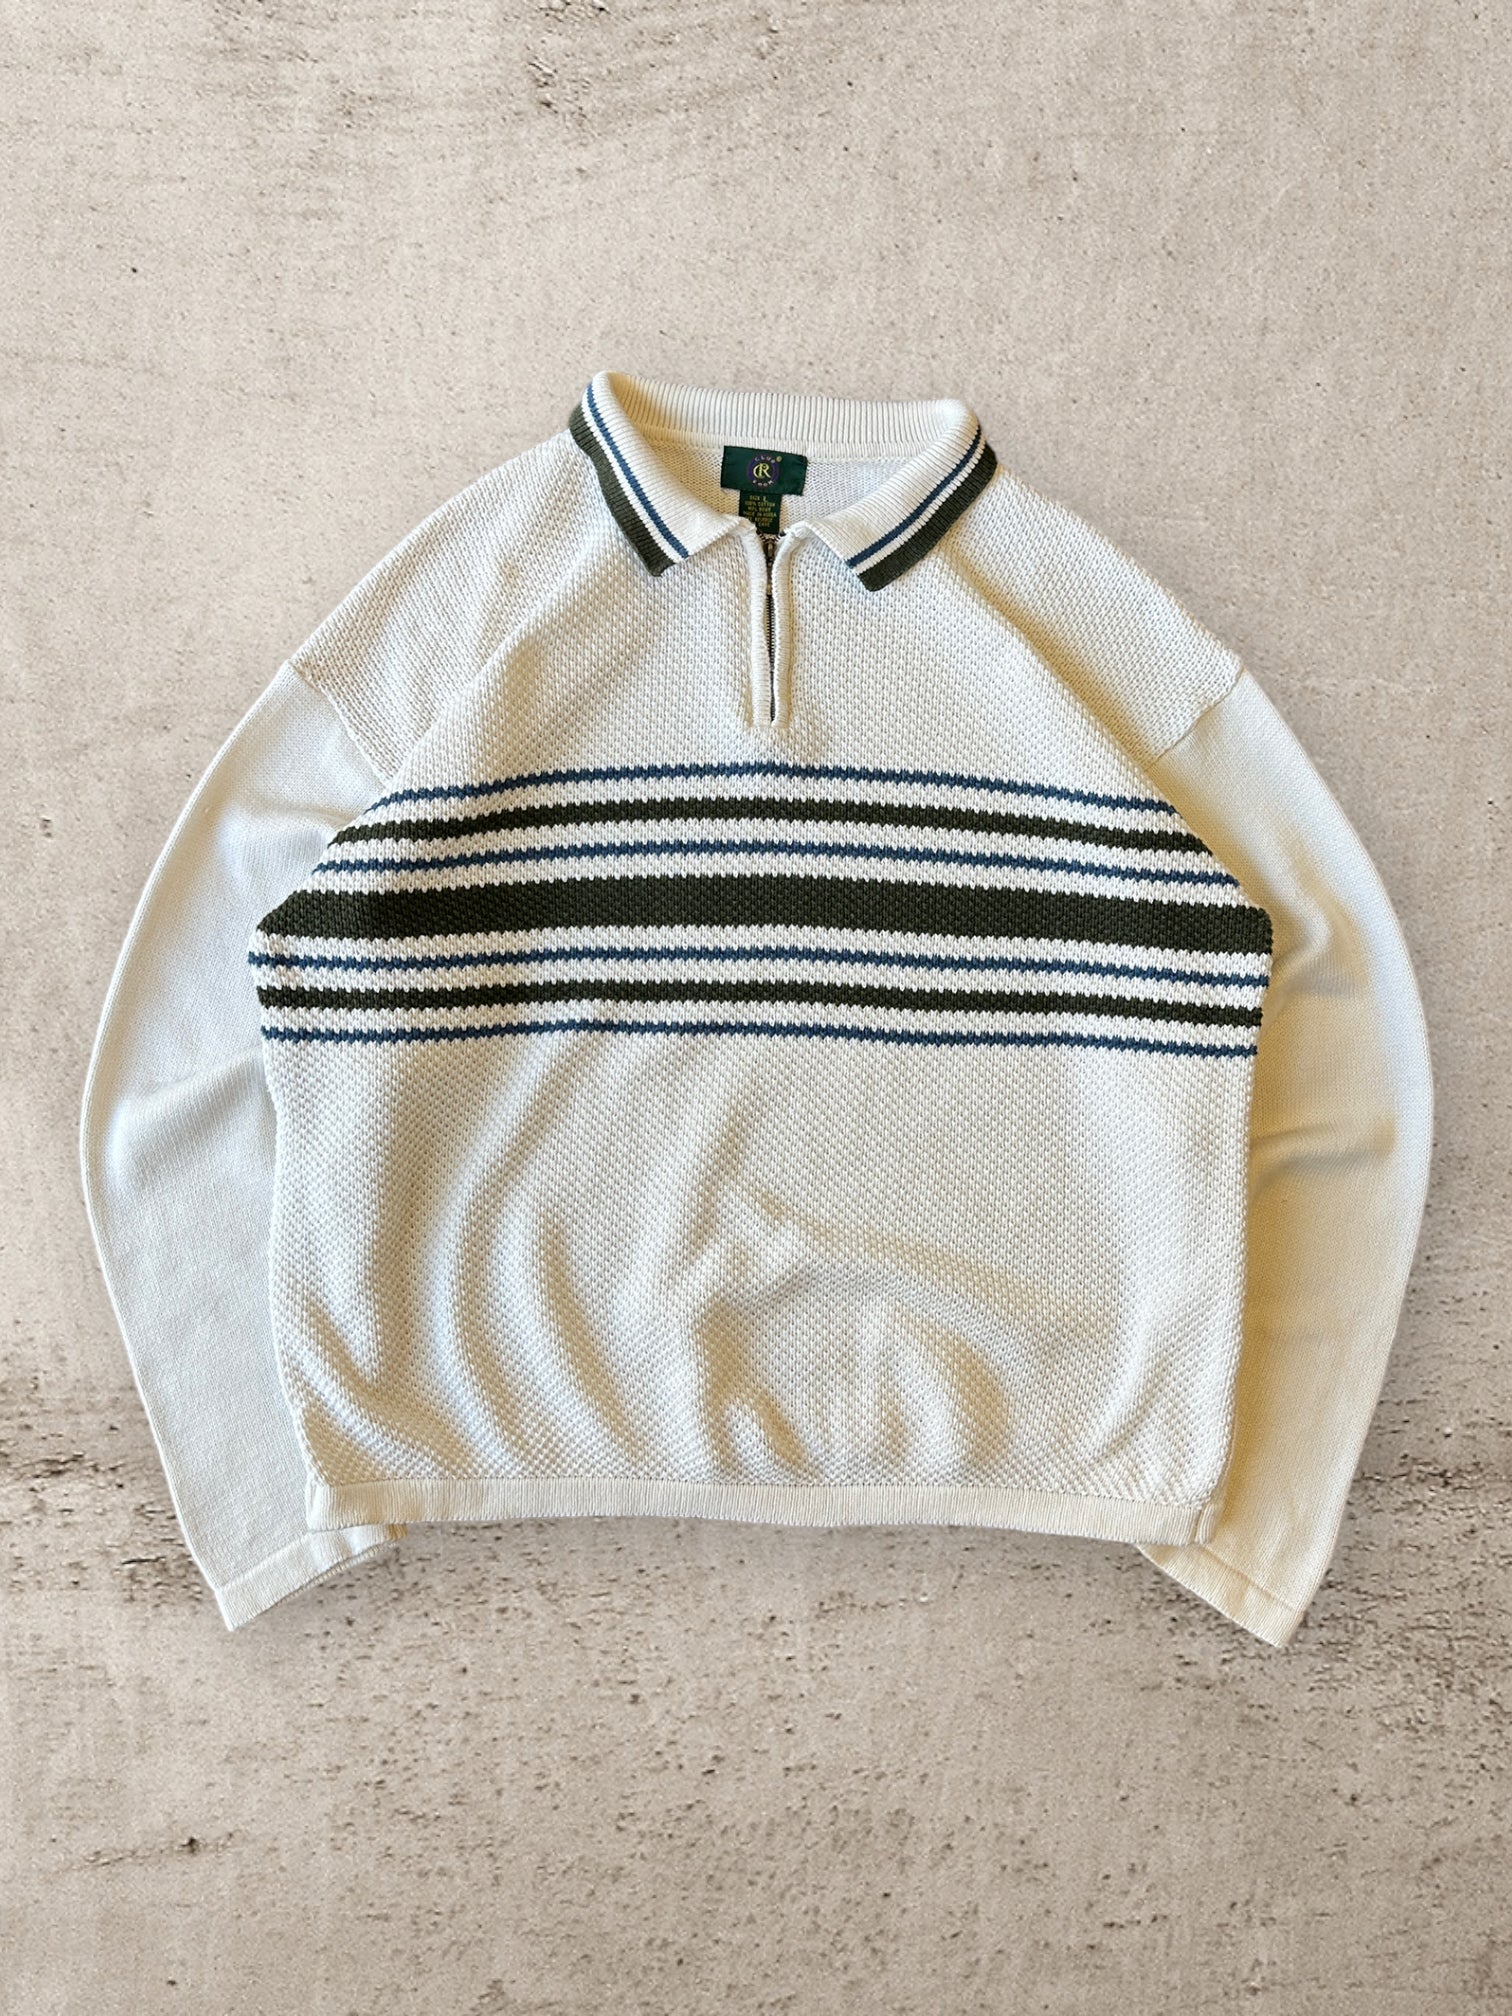 00s Clubroom Striped 1/4 Zip Knit Sweater - Large